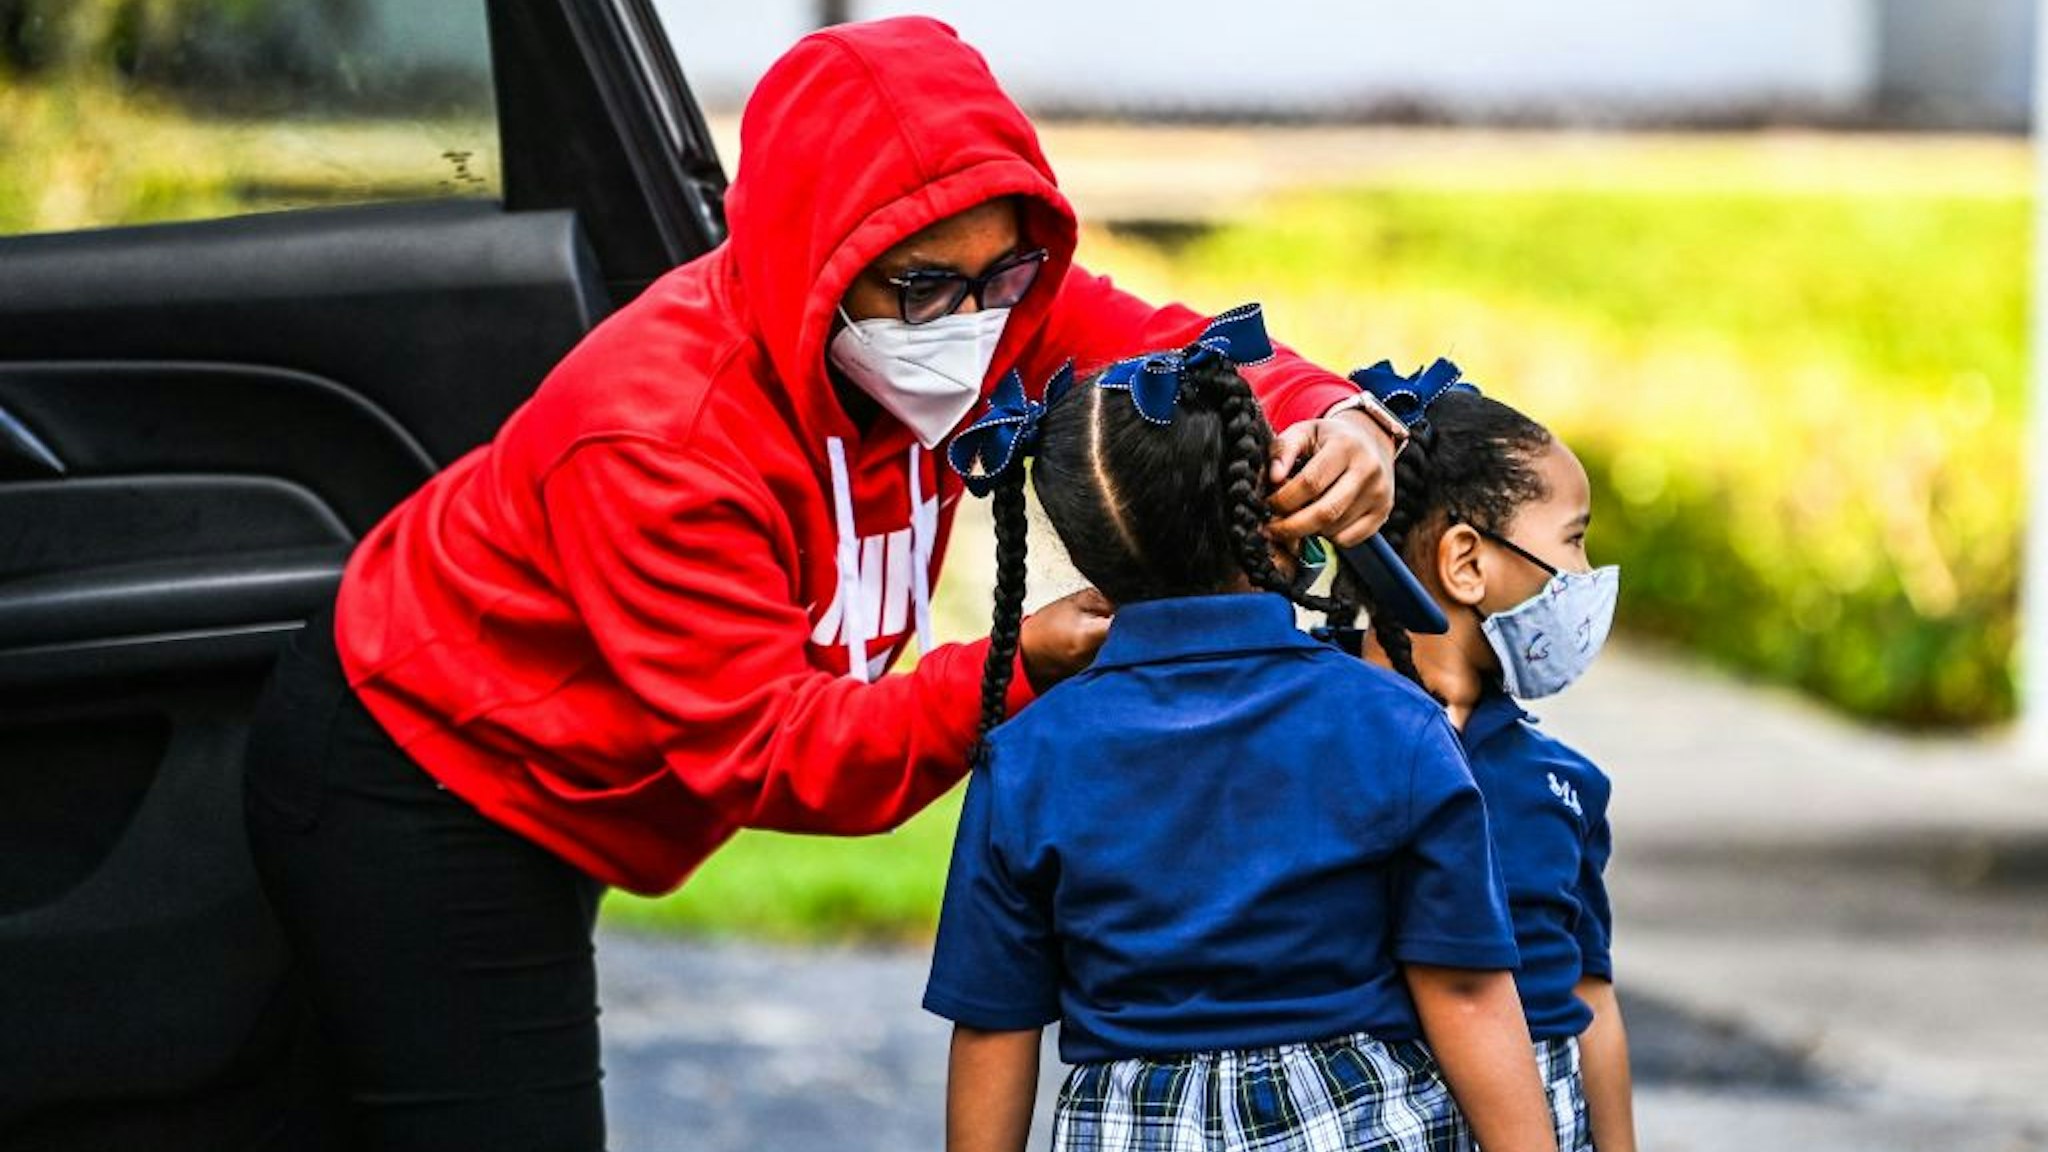 A mother adjusts the facemask of her child as she enters the St. Lawrence Catholic School on the first day of school after summer vacation in north of Miami, on August 18, 2021. (Photo by CHANDAN KHANNA / AFP) (Photo by CHANDAN KHANNA/AFP via Getty Images)